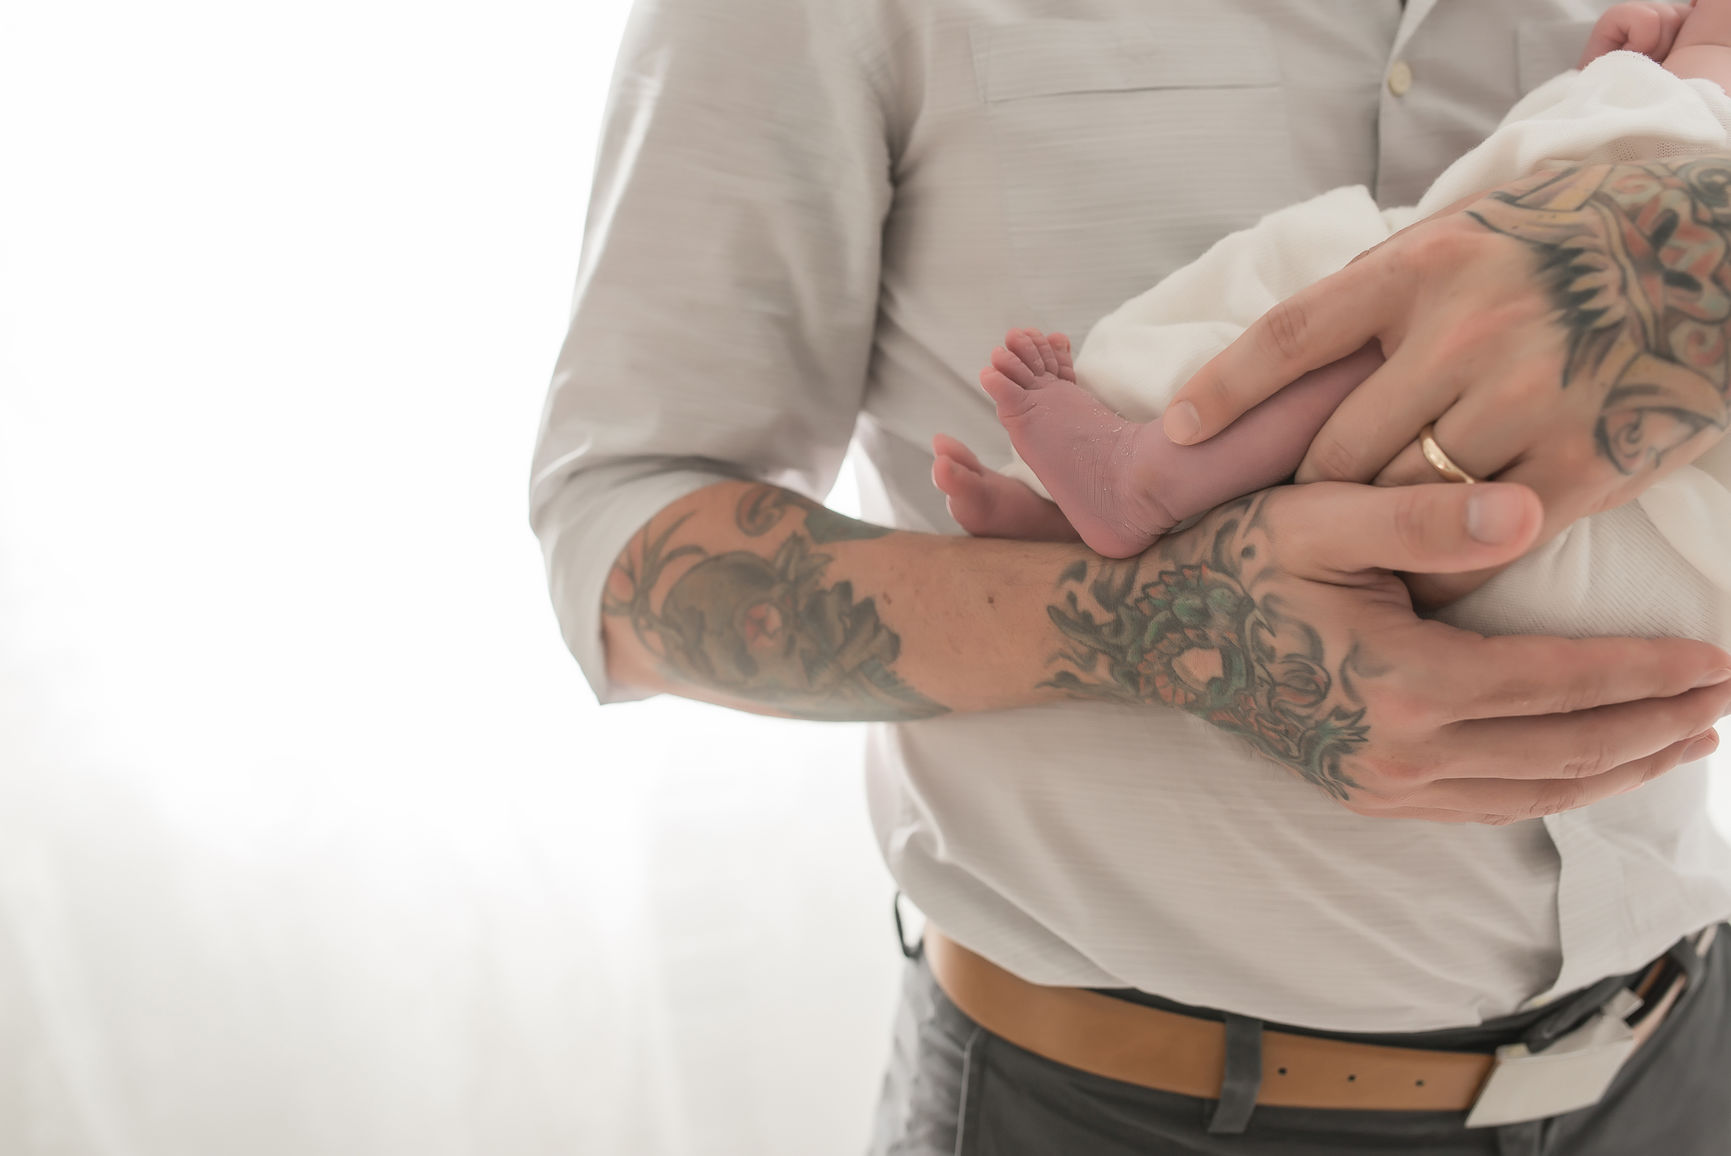 Father's Tattooed Hands Hold Baby